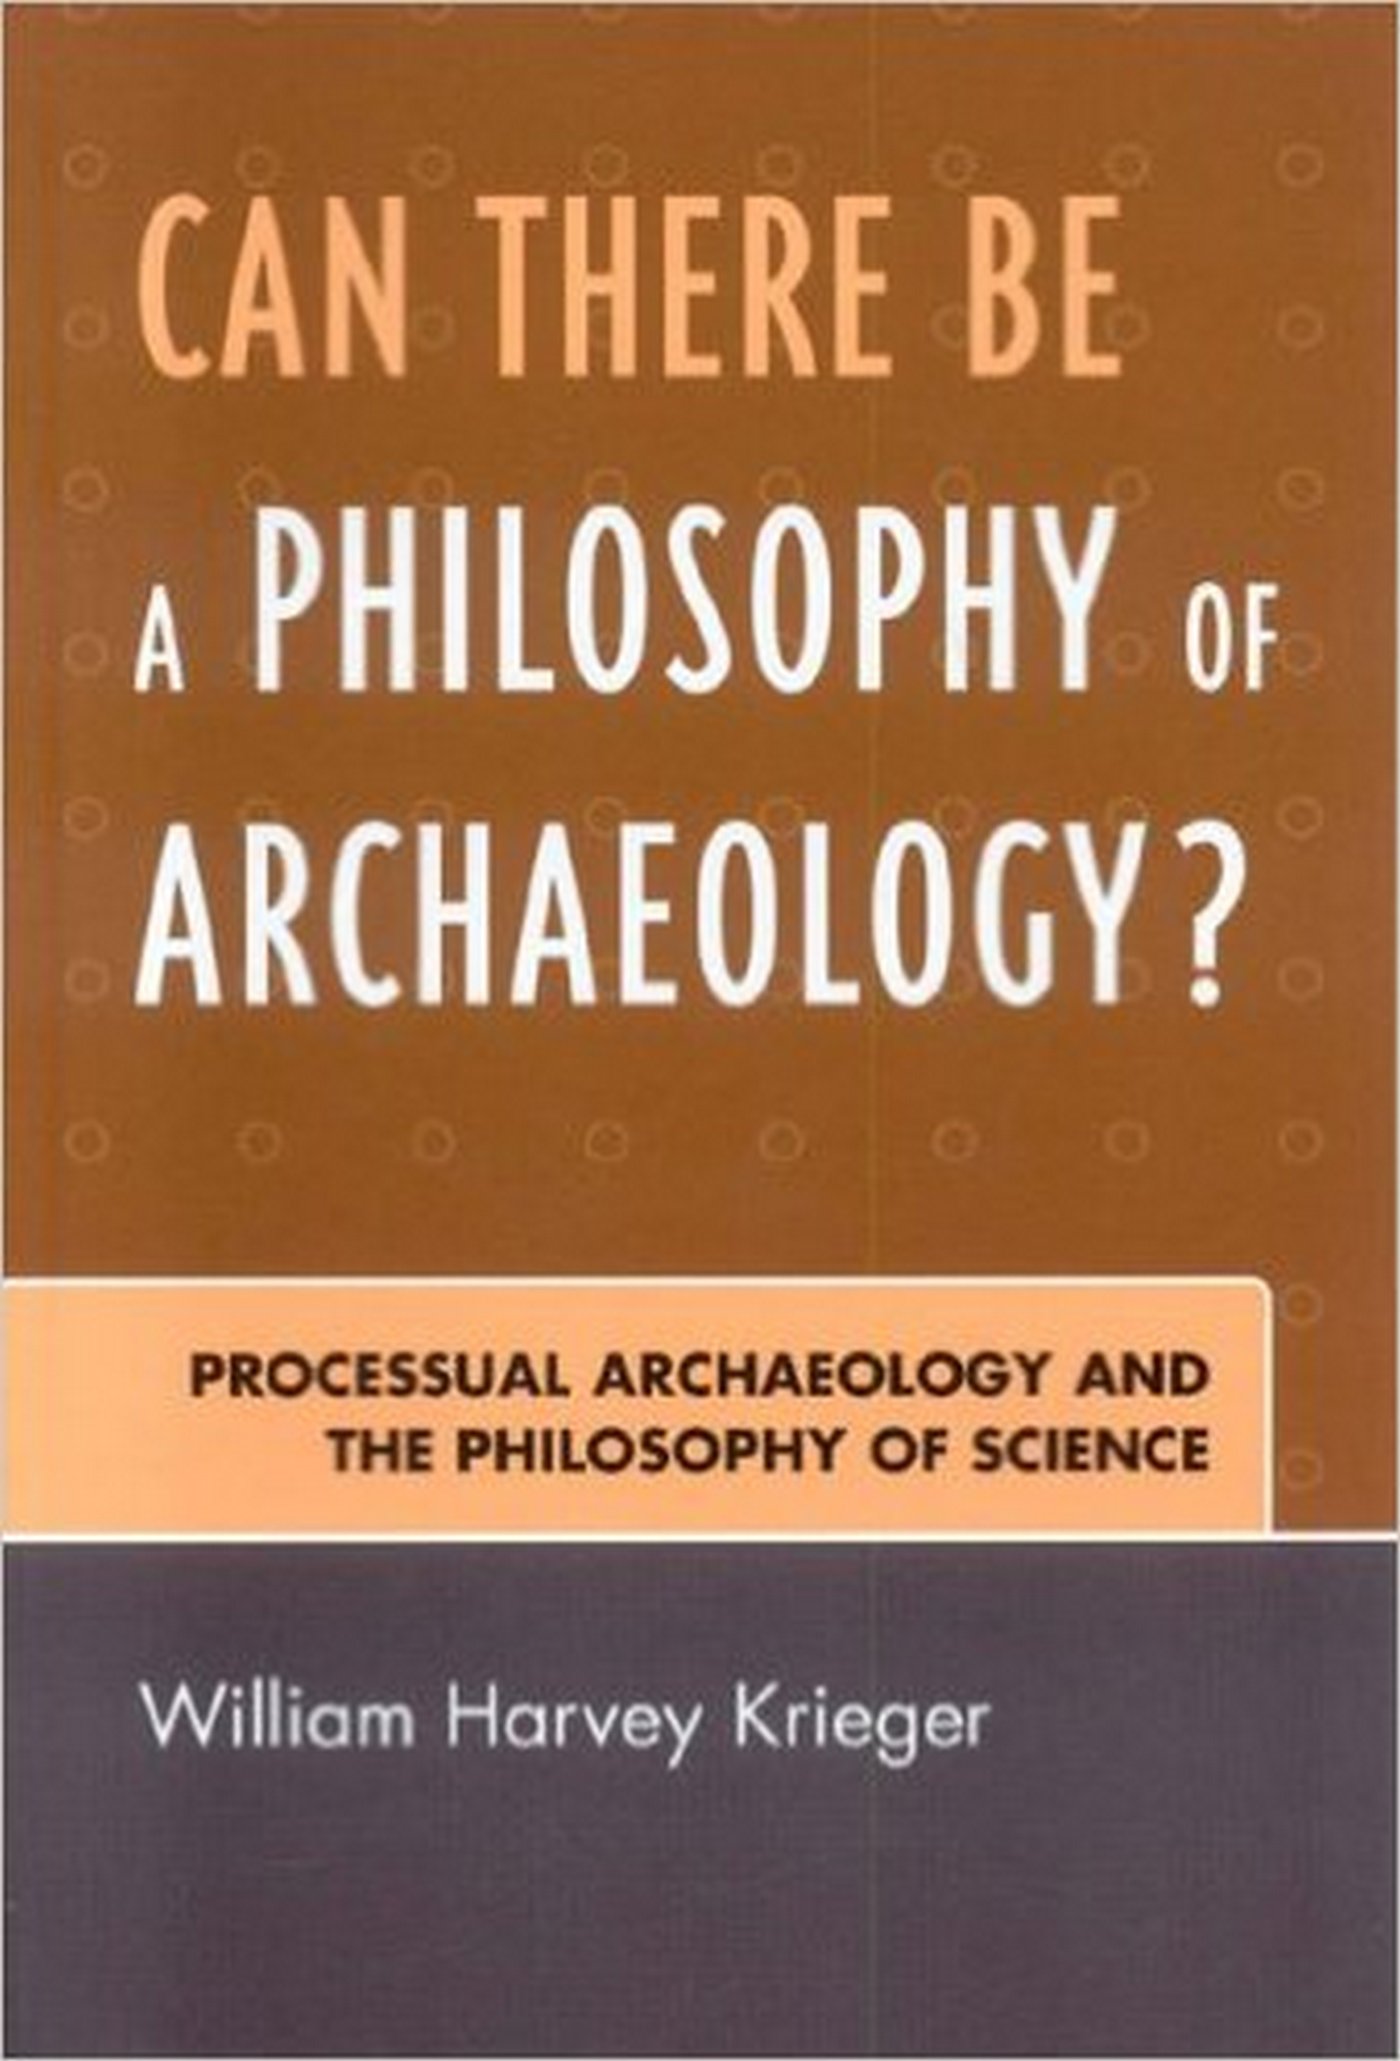 Can There Be A Philosophy of Archaeology?: Processual Archaeology and the Philosophy of Science